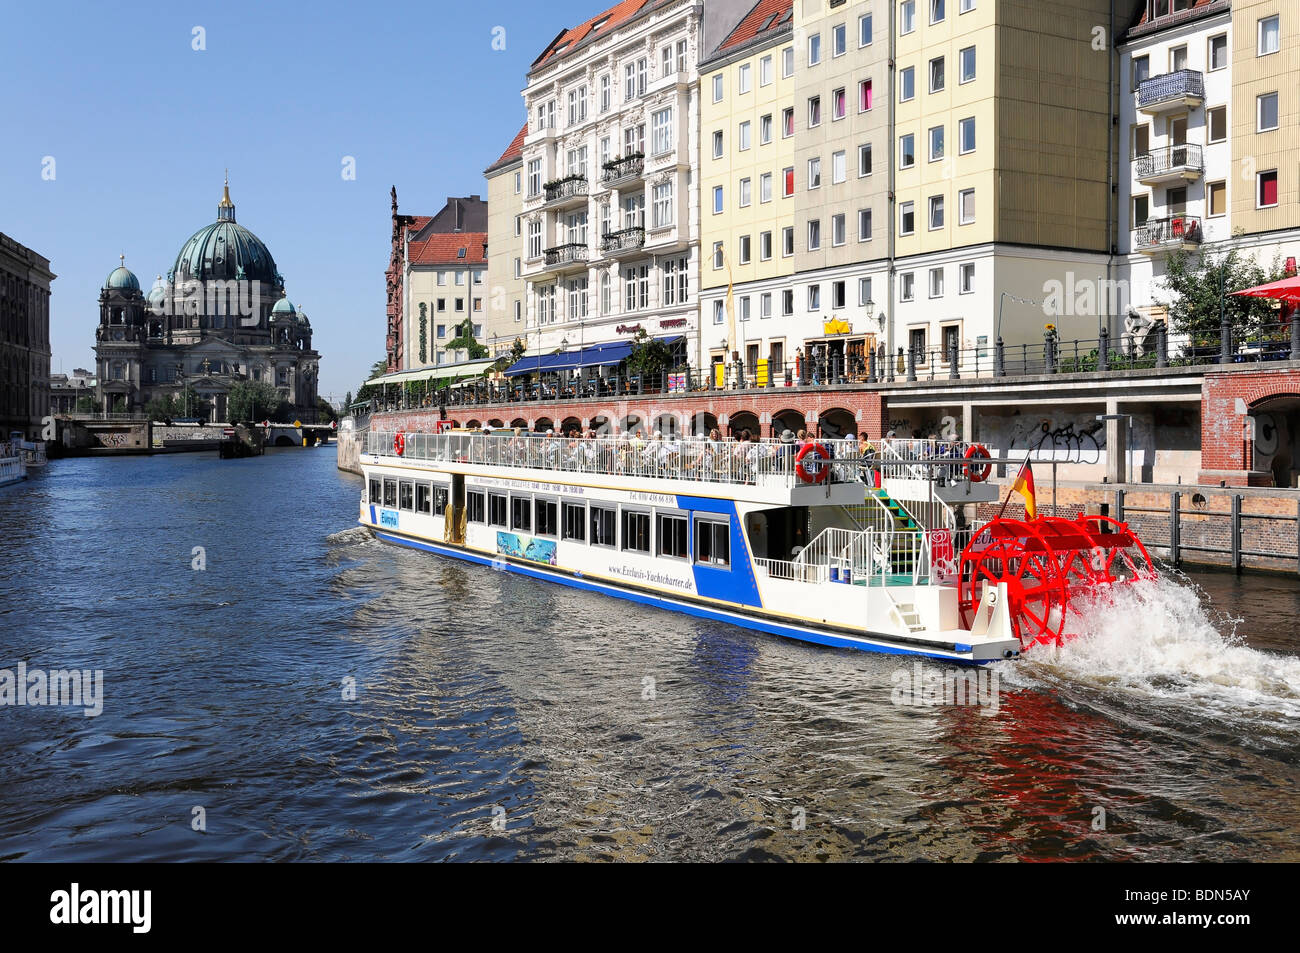 Passenger boat on the Spree river, in the back the Berliner Dom cathedral, capital Berlin, Germany, Europe Stock Photo